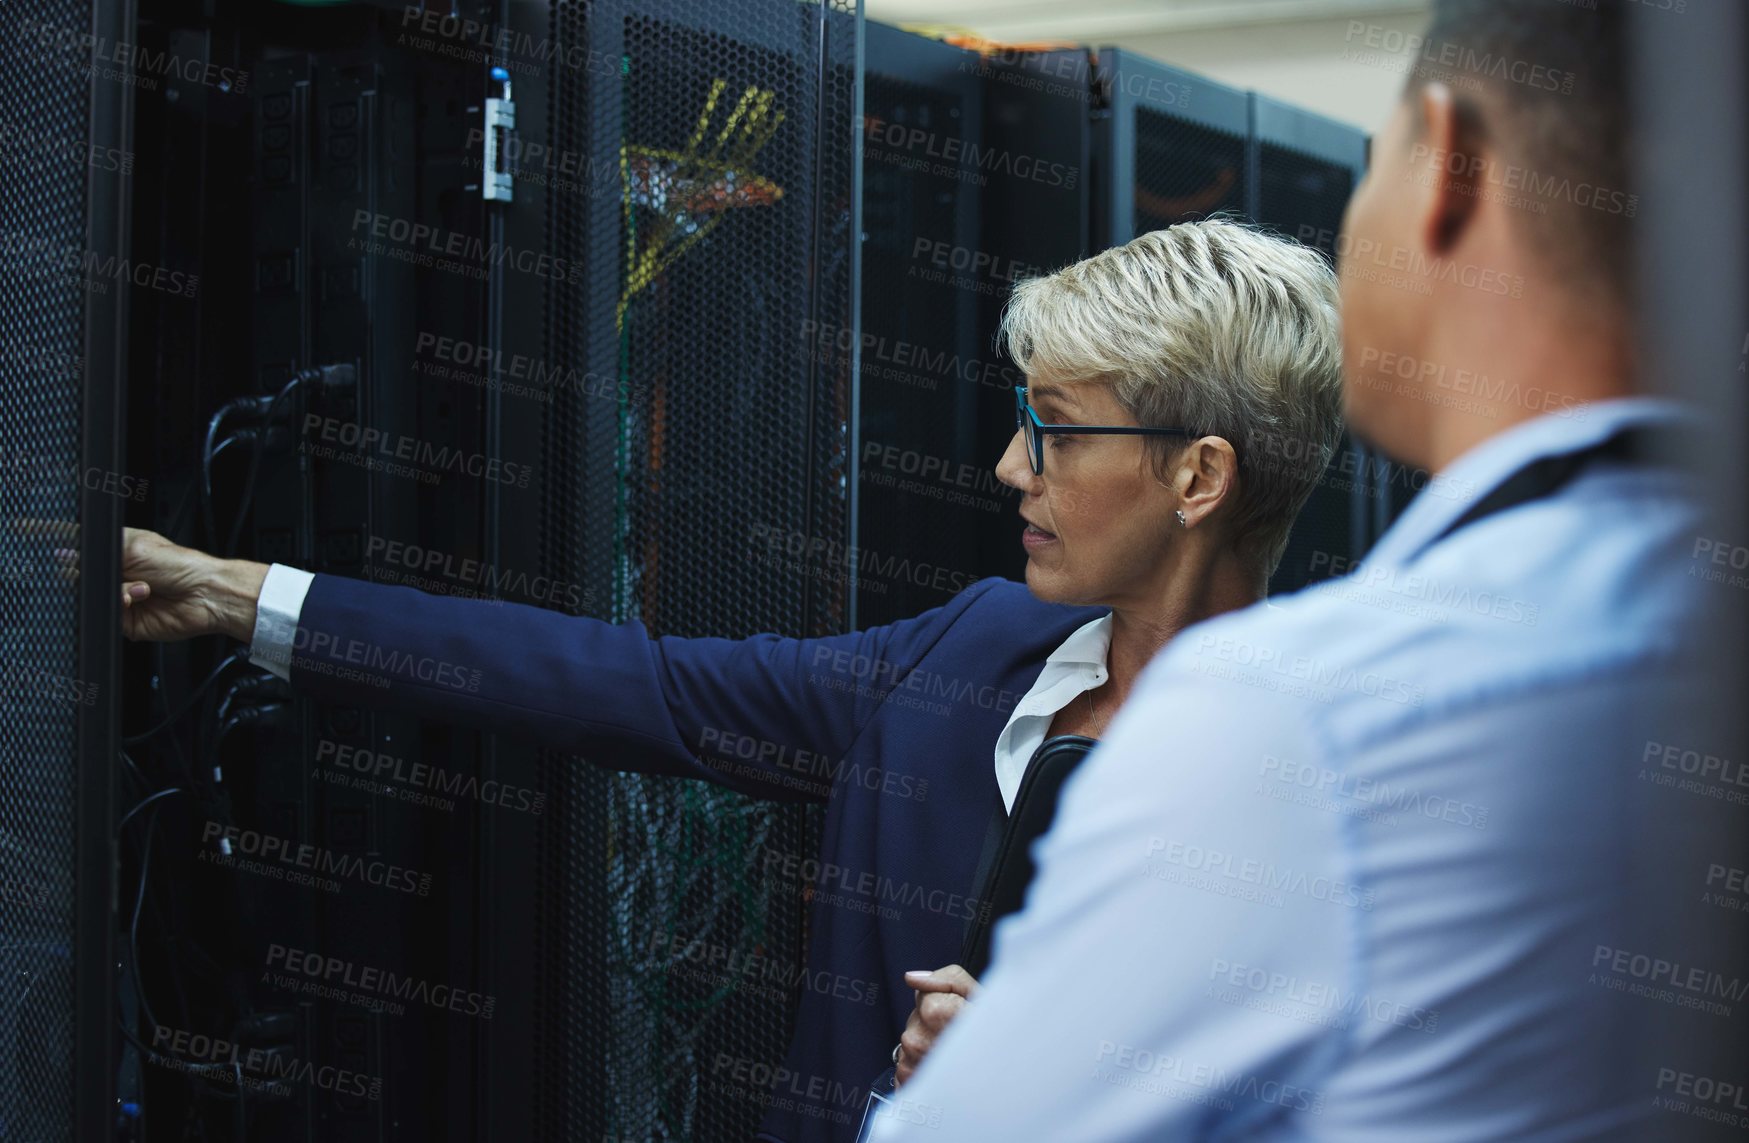 Buy stock photo Shot of two workers inspecting the electronic equipment in a server room together at work